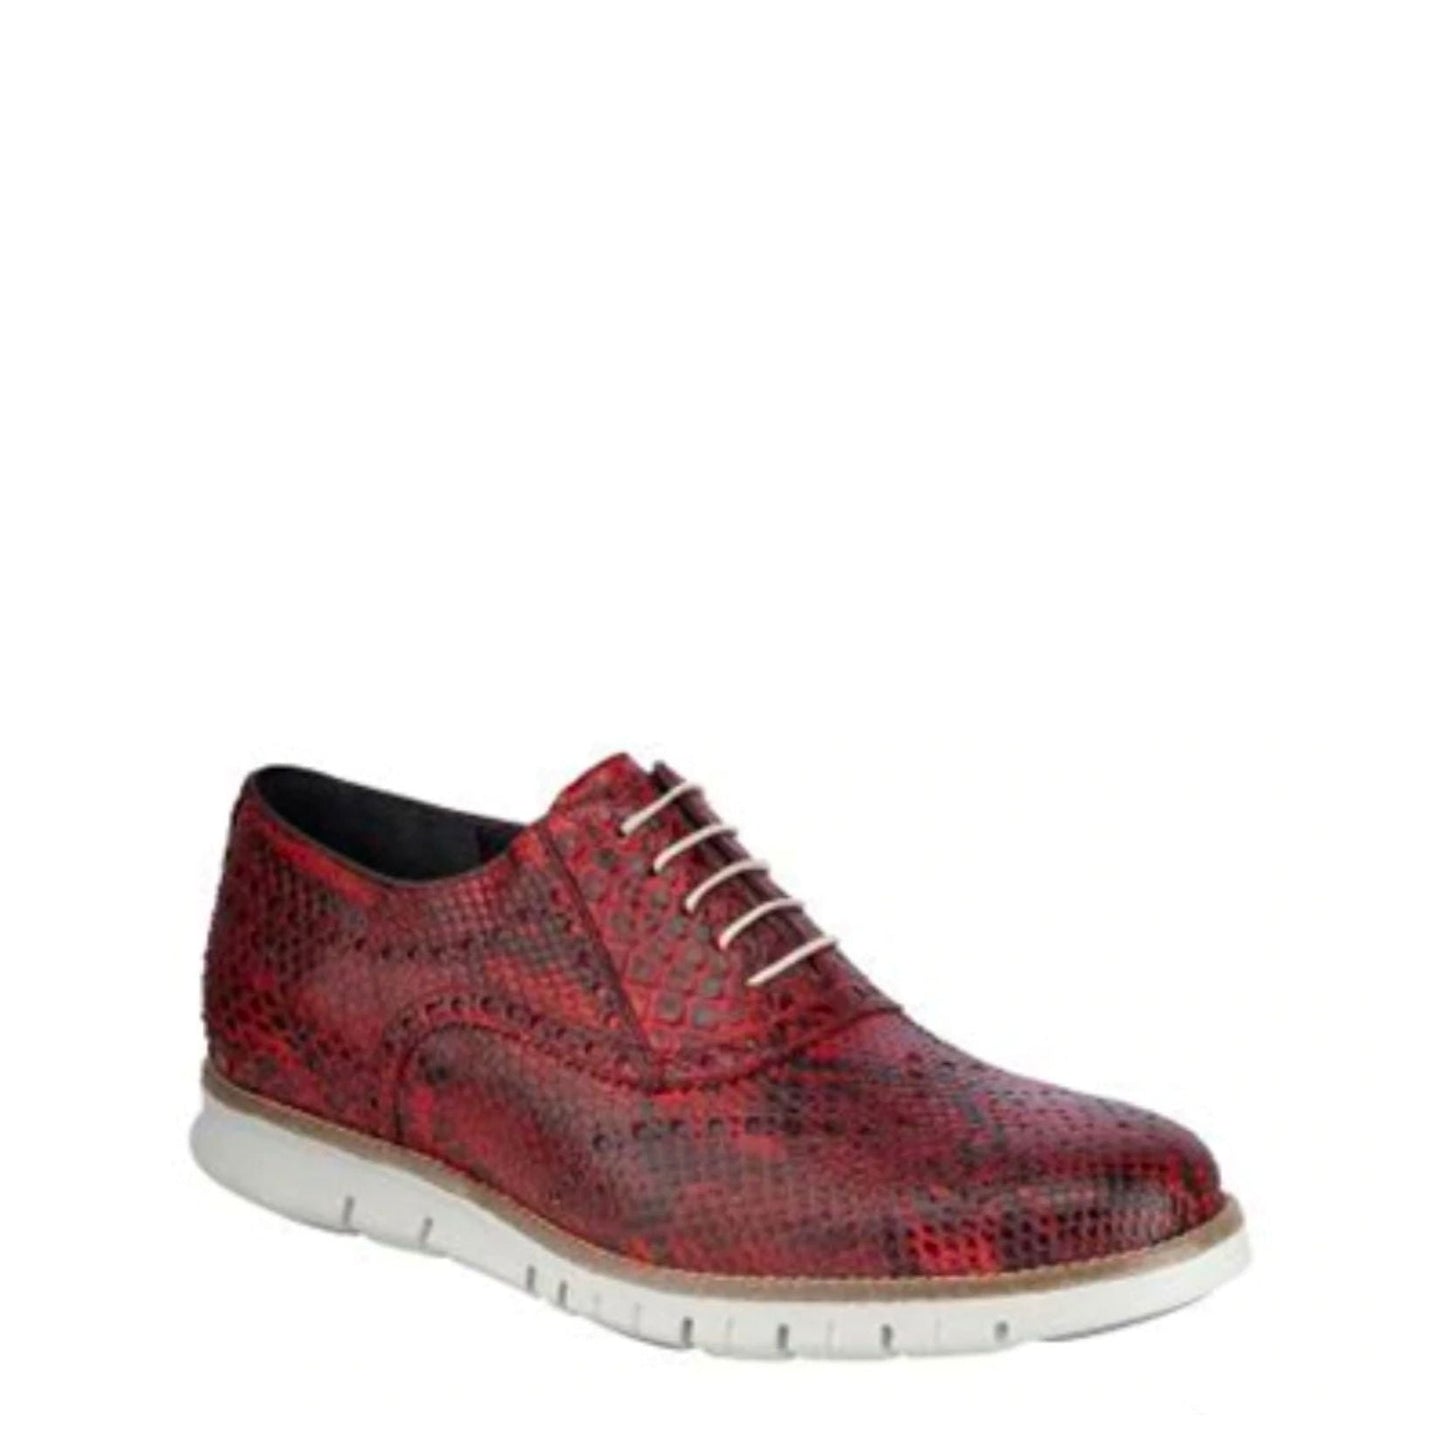 21WPBPB - Cuadra red casual fashion python oxford sneakers for men-Kuet.us